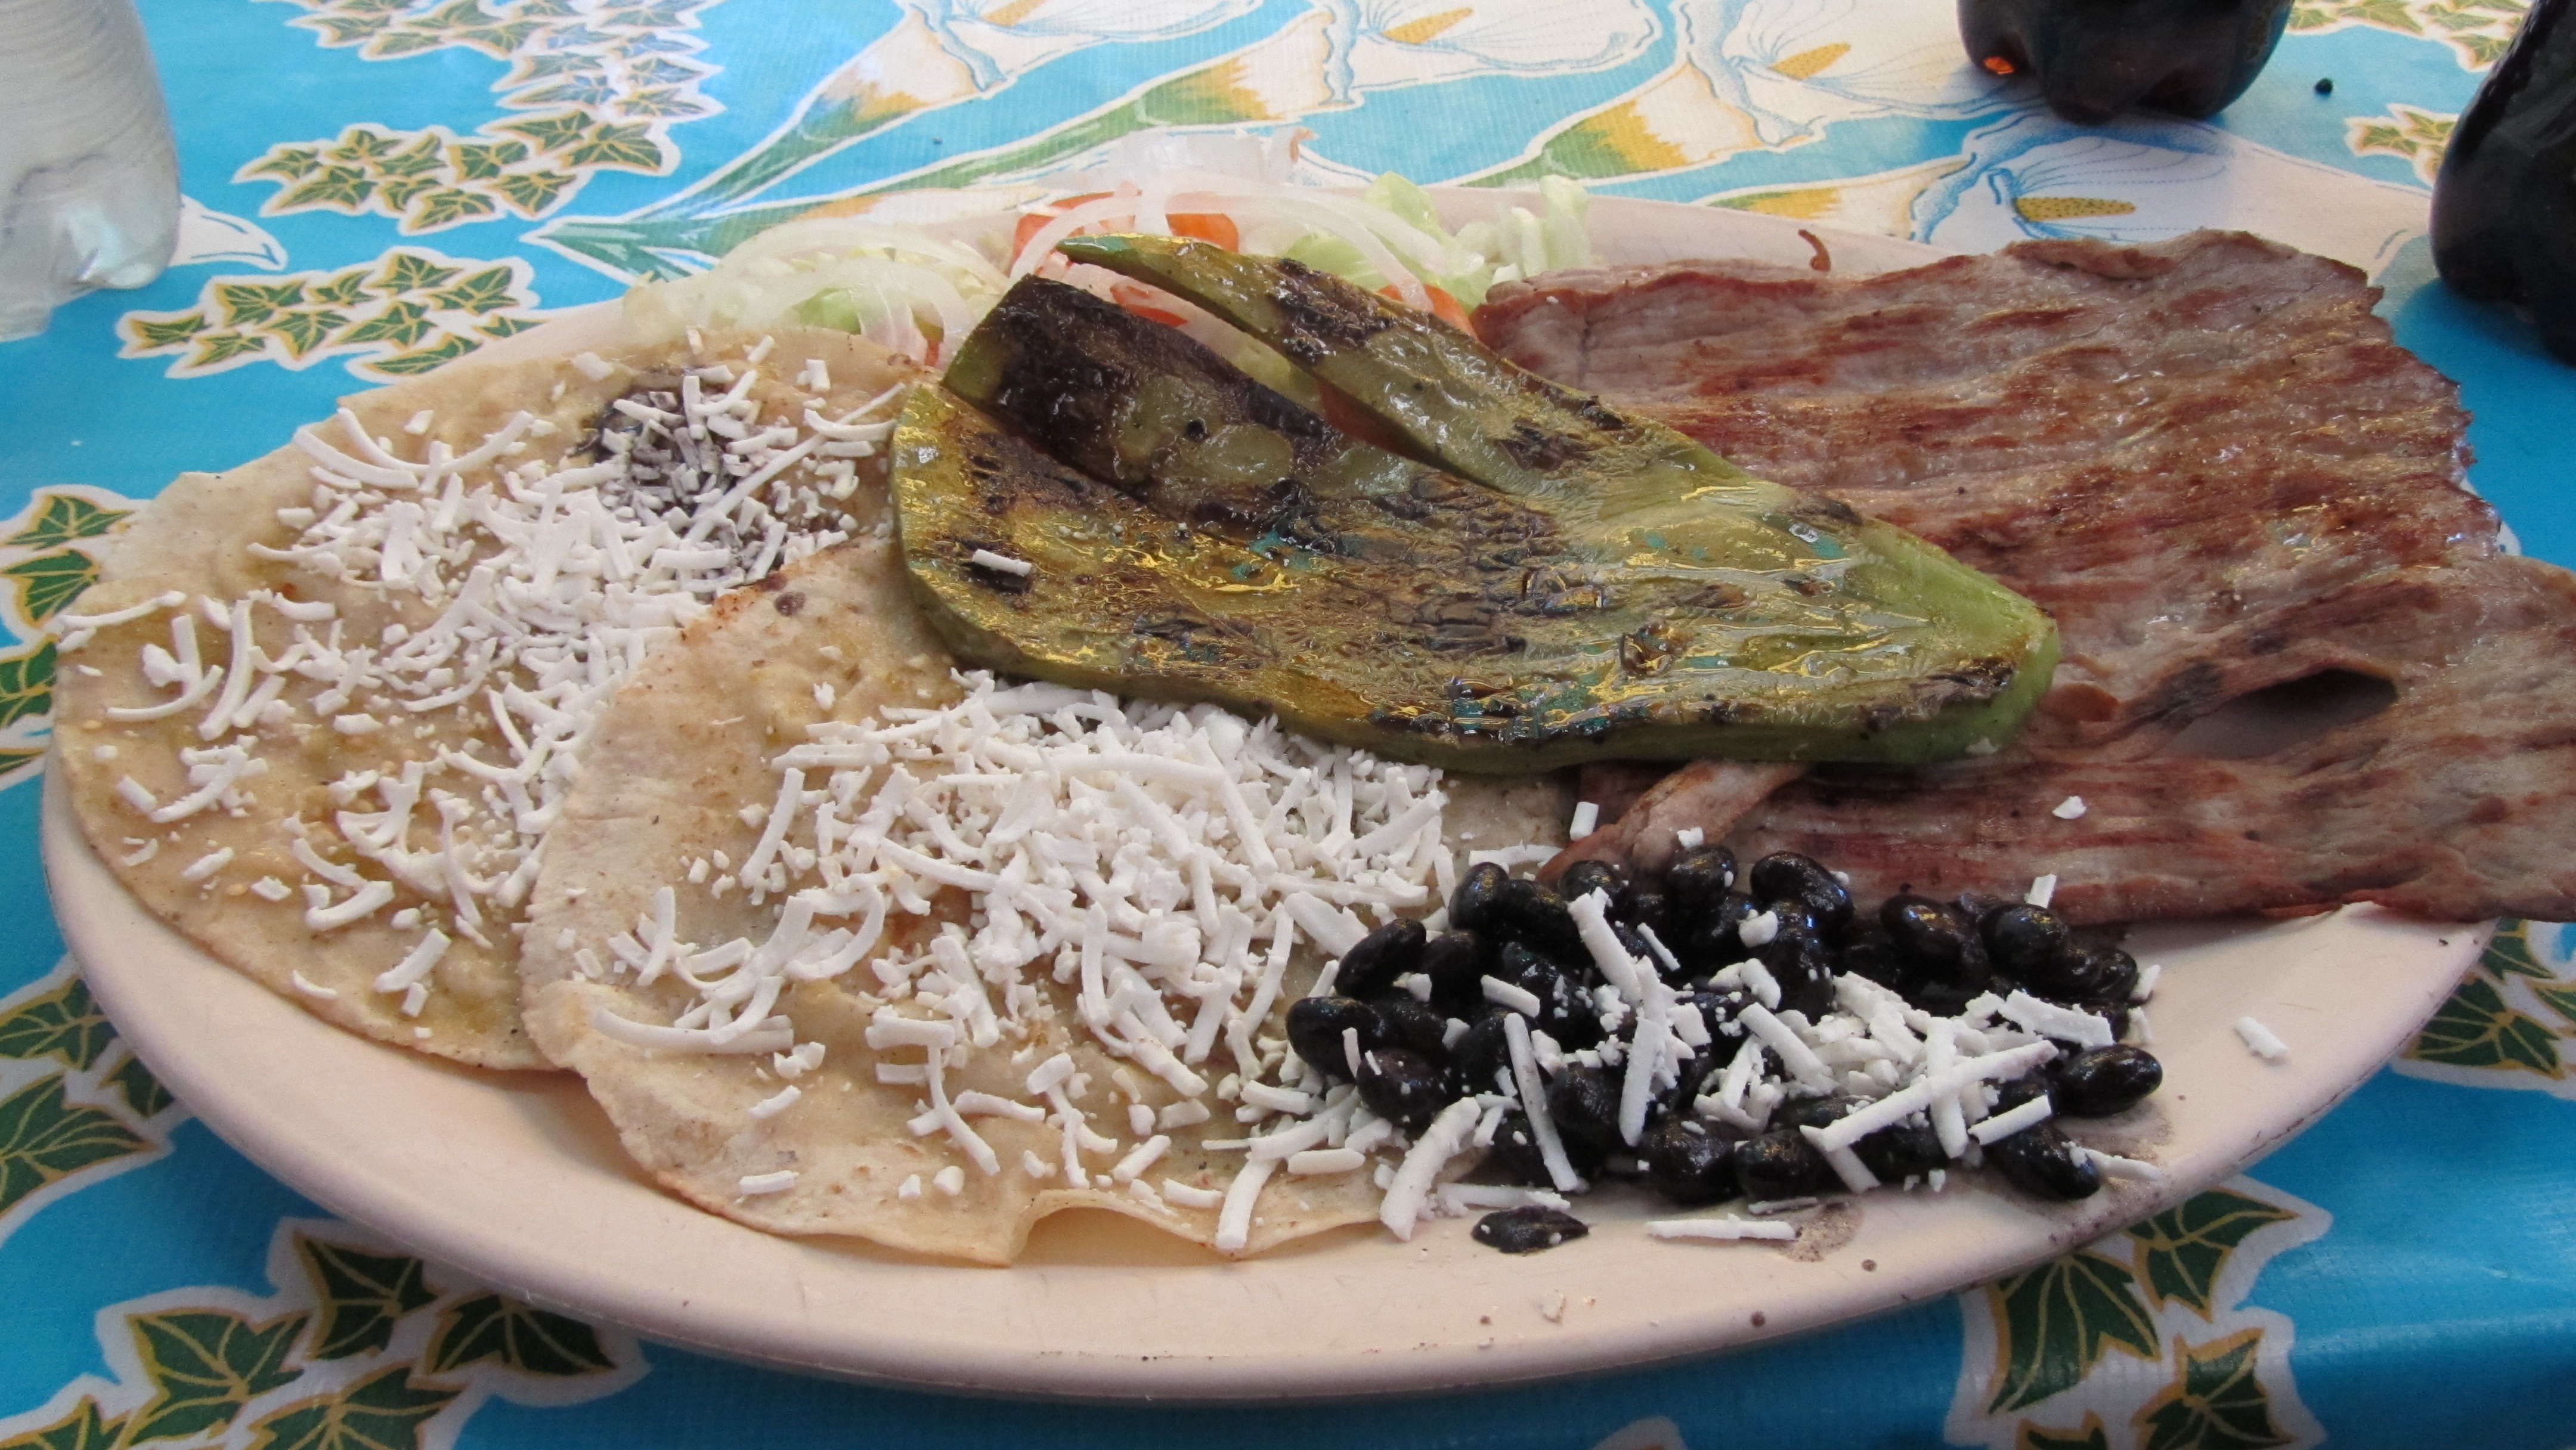 Cactus and grilled meat!